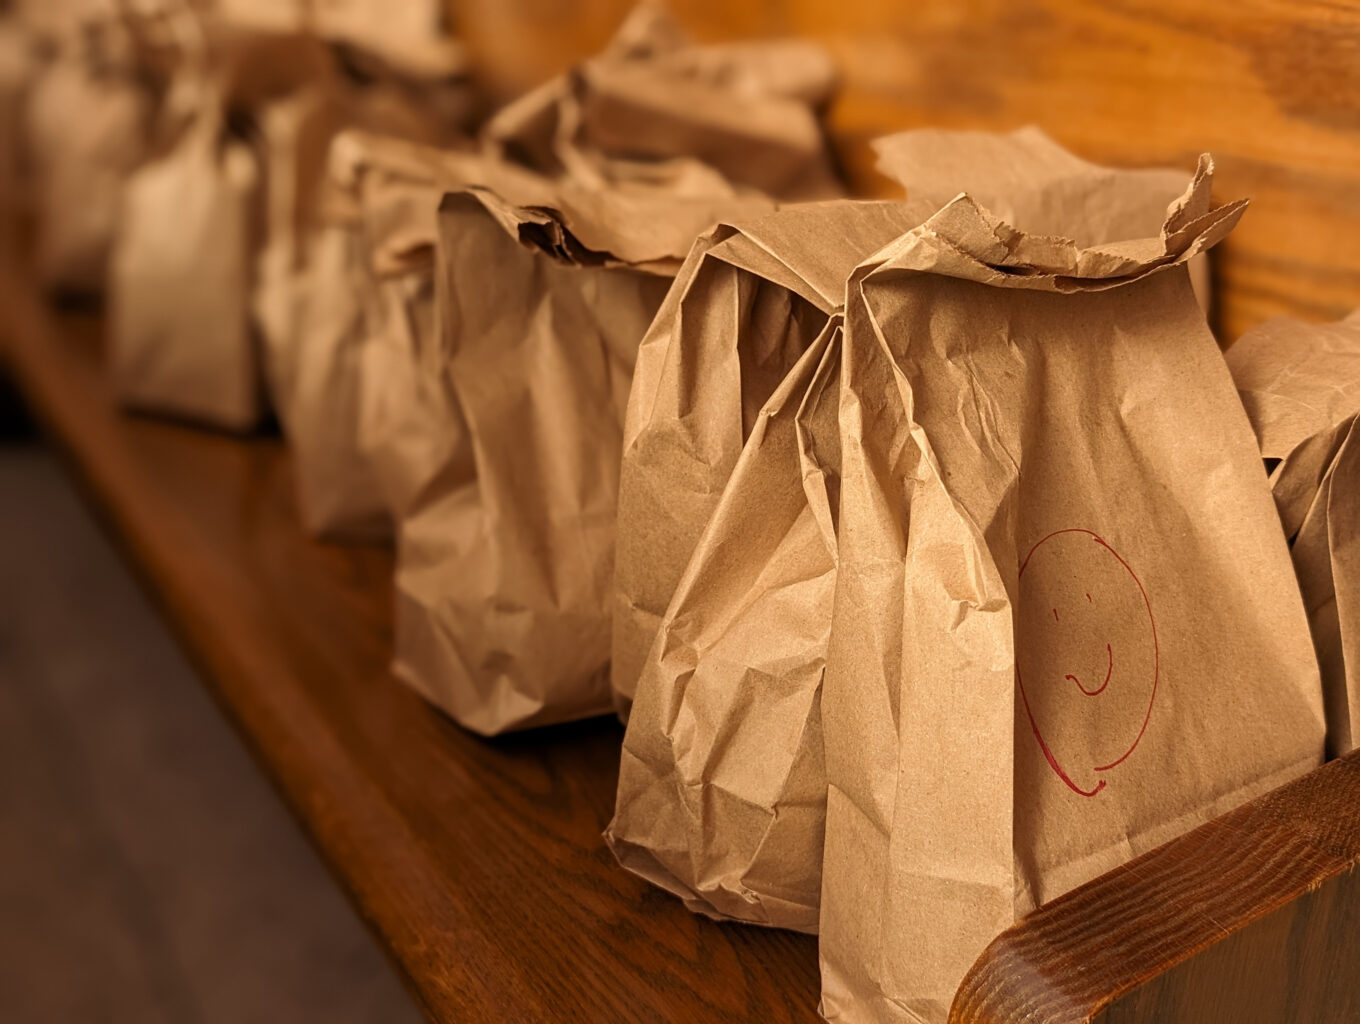 Packed lunches to be distributed to those in need